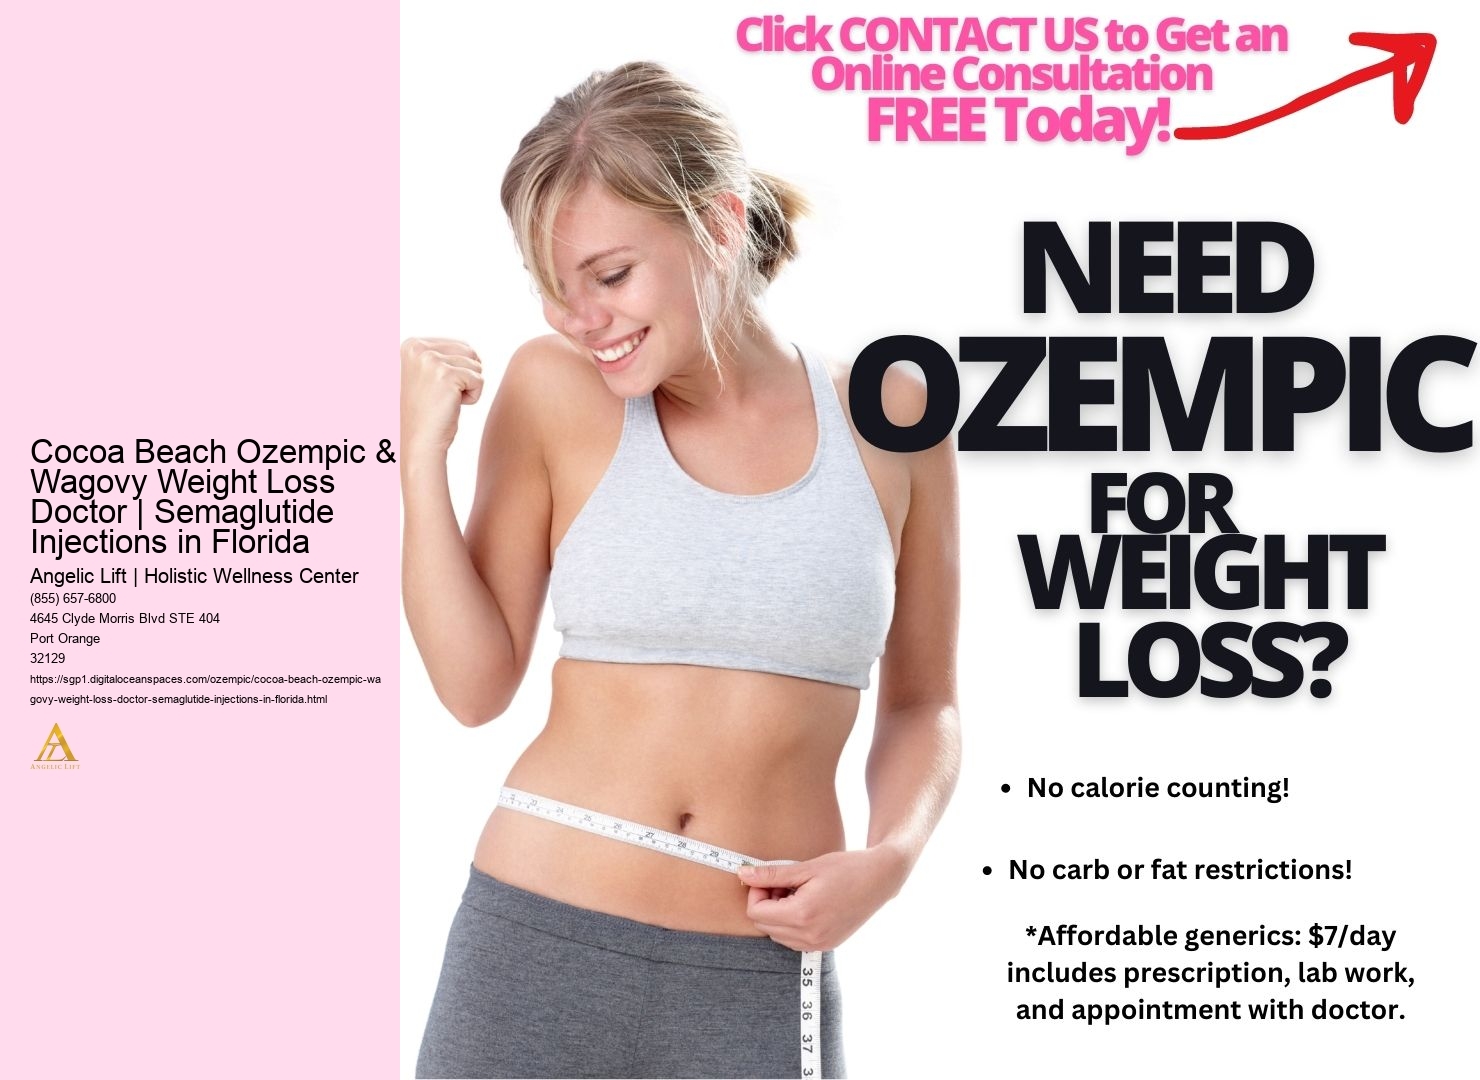 Cocoa Beach Ozempic & Wagovy Weight Loss Doctor | Semaglutide Injections in Florida